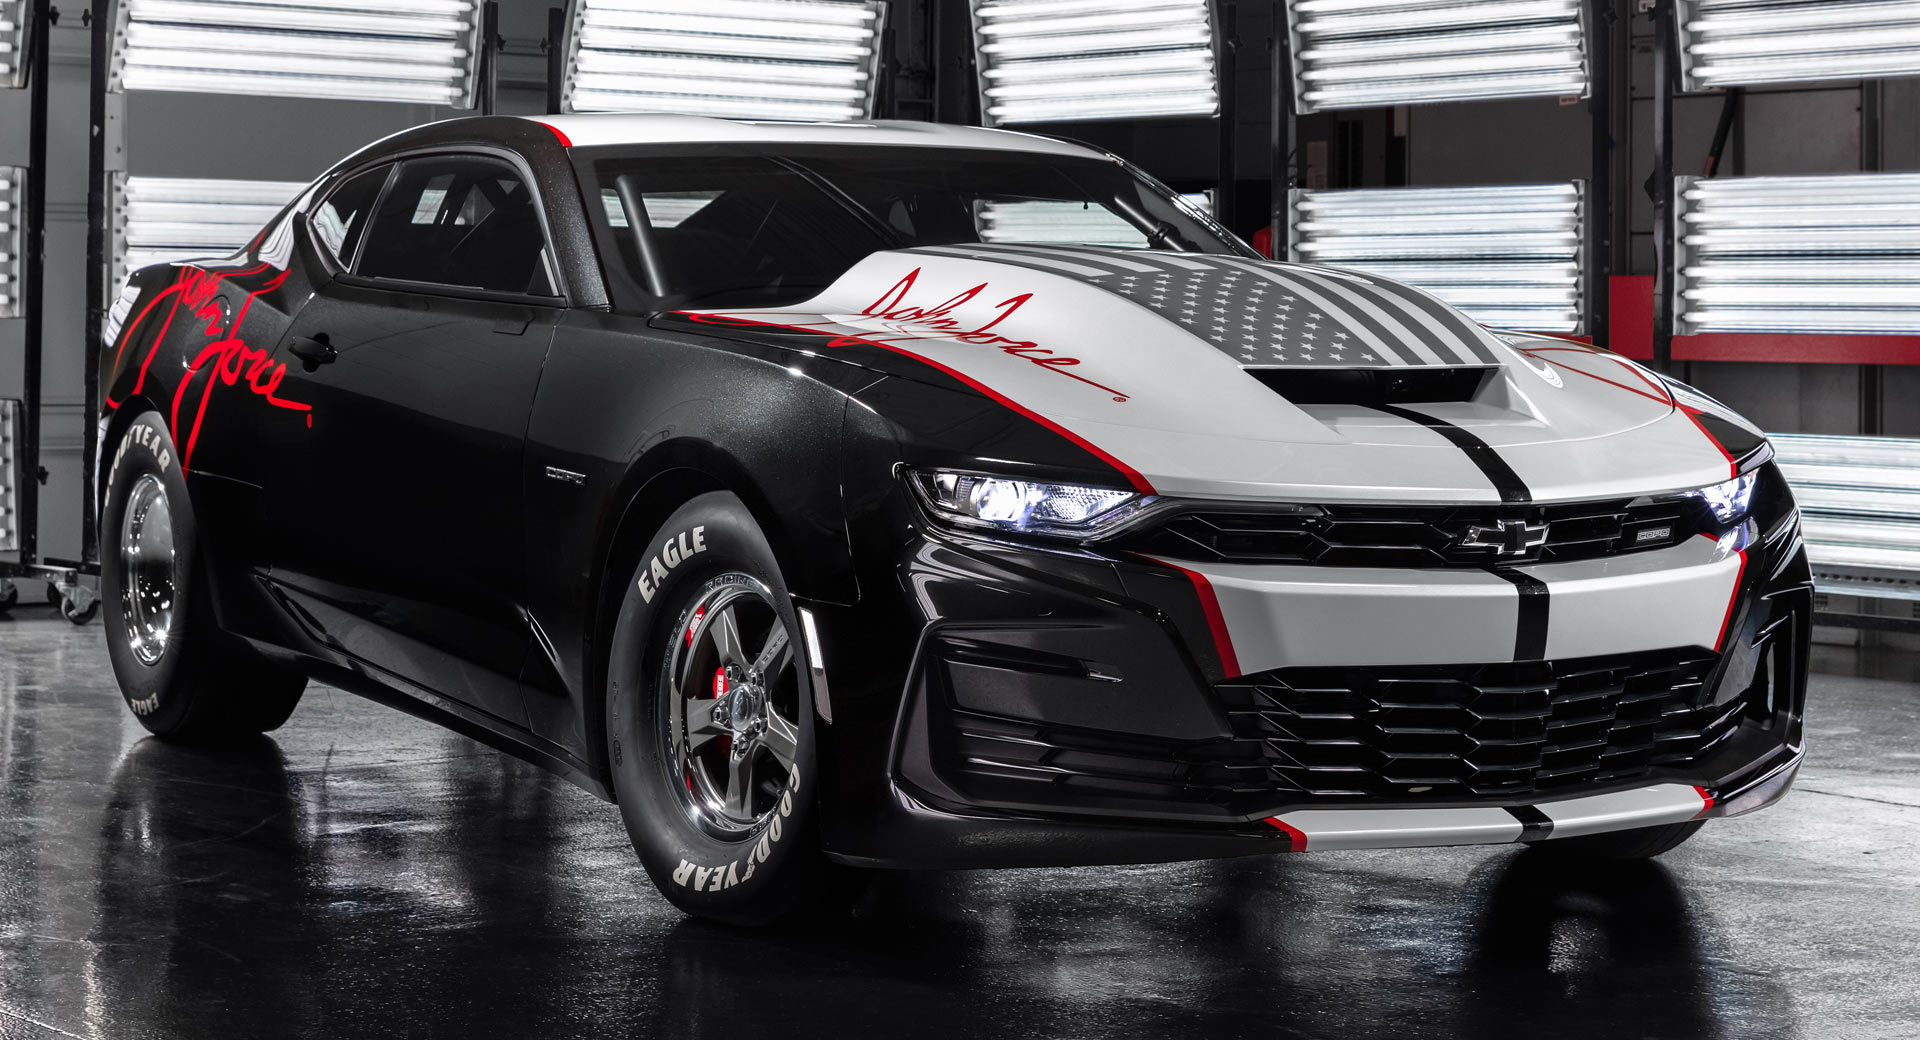 2020 Chevy COPO Camaro Pays Tribute To Drag Racing Legend John Force |  Carscoops